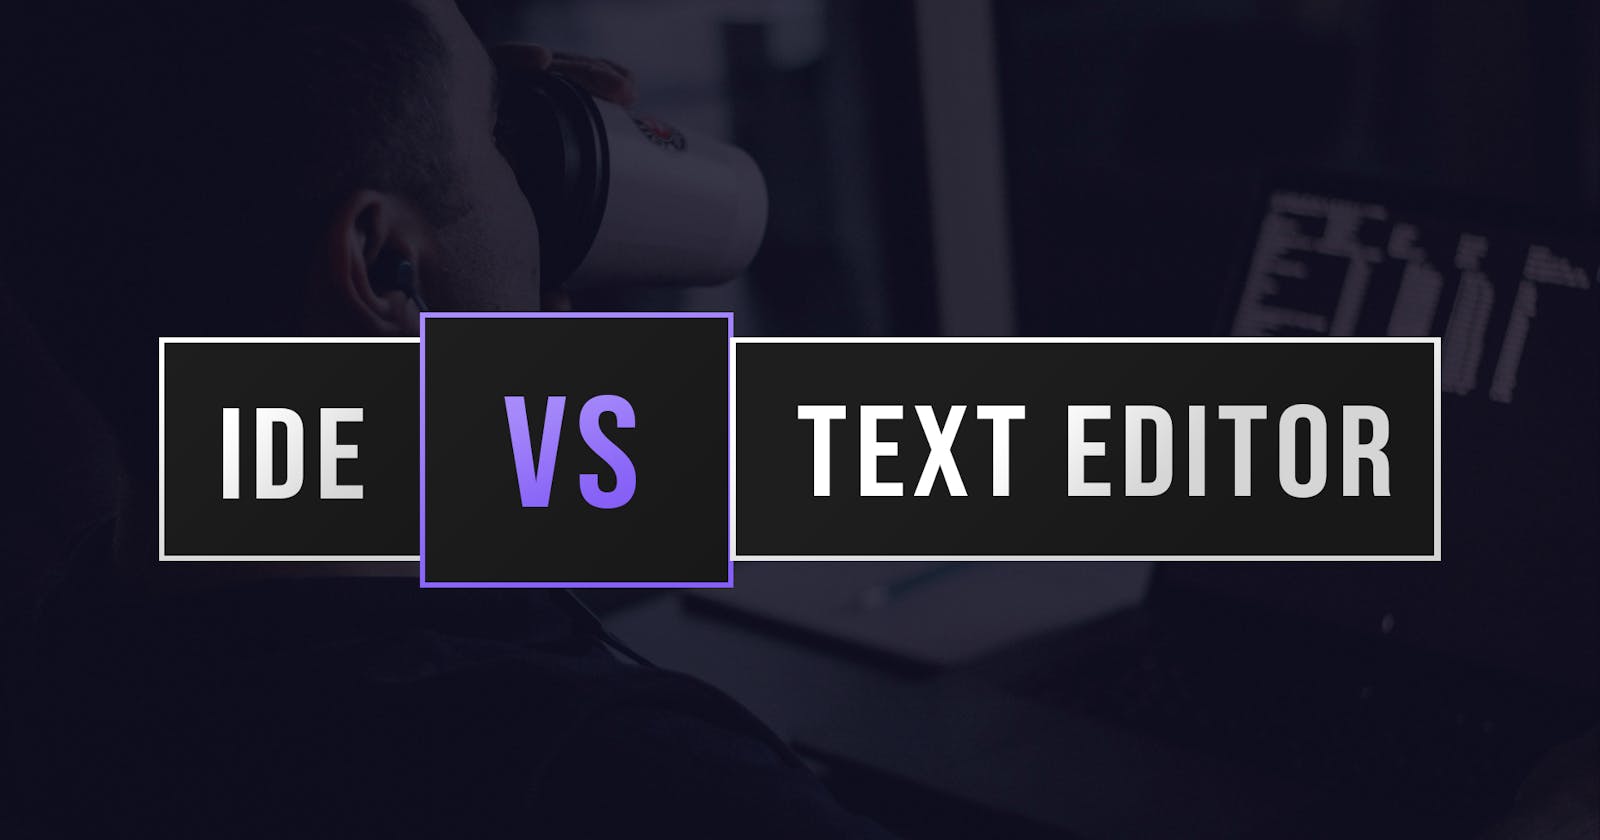 IDEs vs Text Editors - What's the difference?